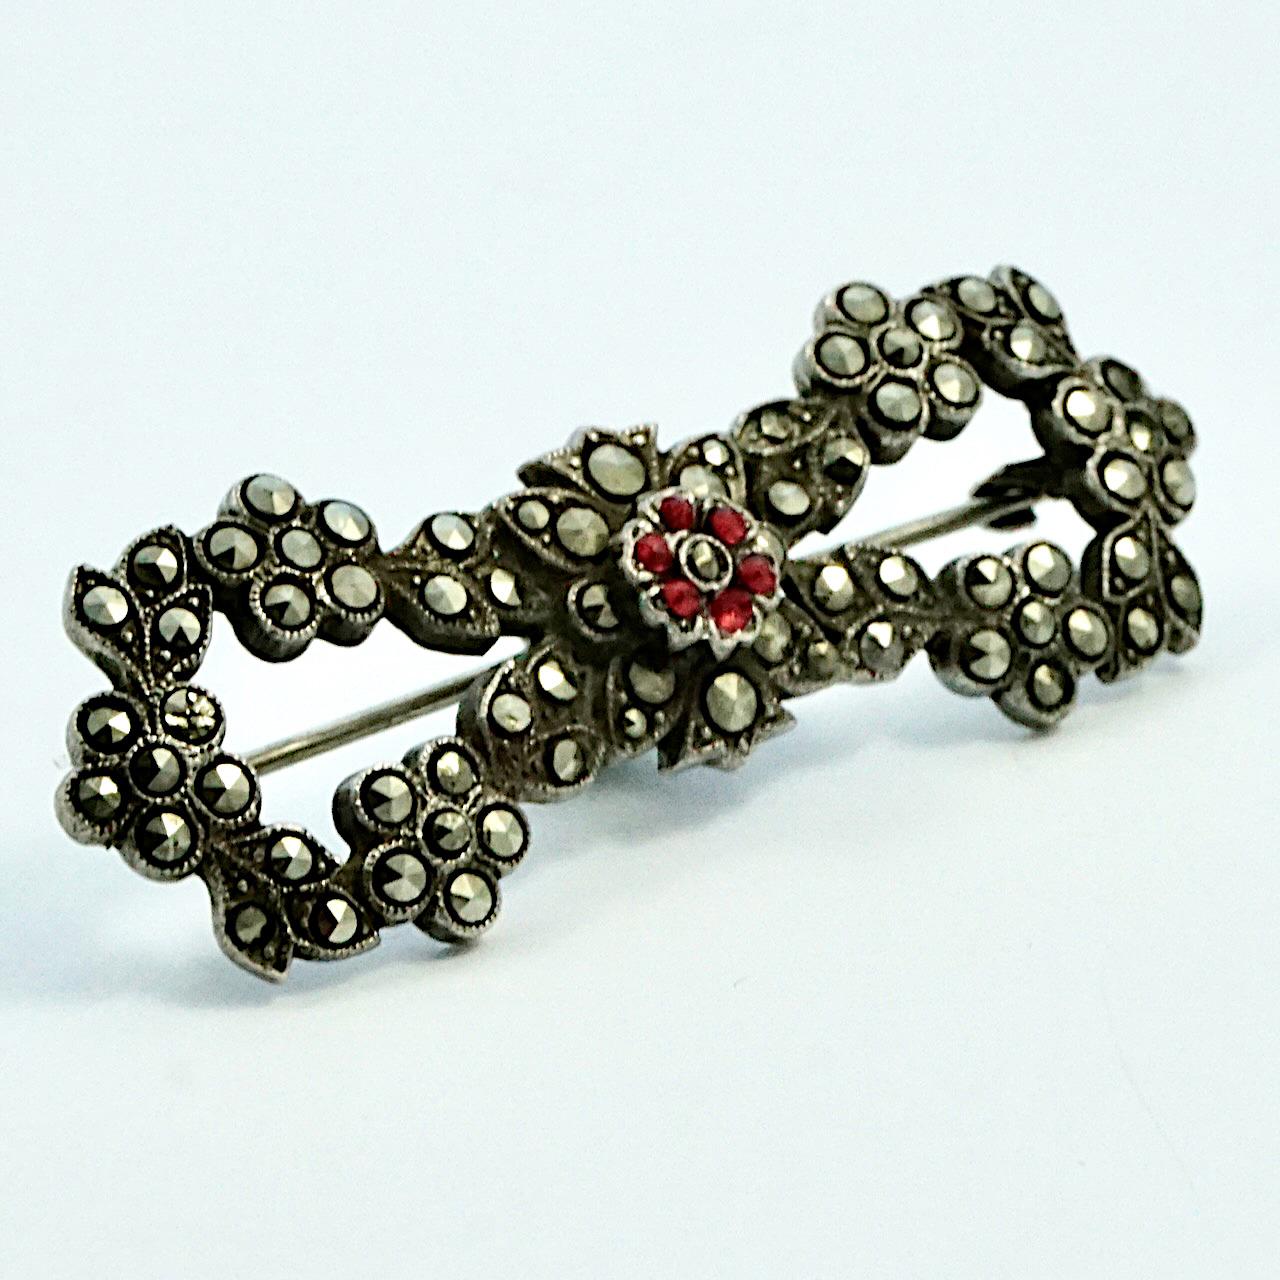 Beautiful sterling silver bow brooch with a flower and leaf design, and set with marcasites and a red paste stone centre flower. Measuring length 5.15 cm / 2 inches by width 1.85 cm / 1.73 inch. It is in very good condition, there is some wear to a